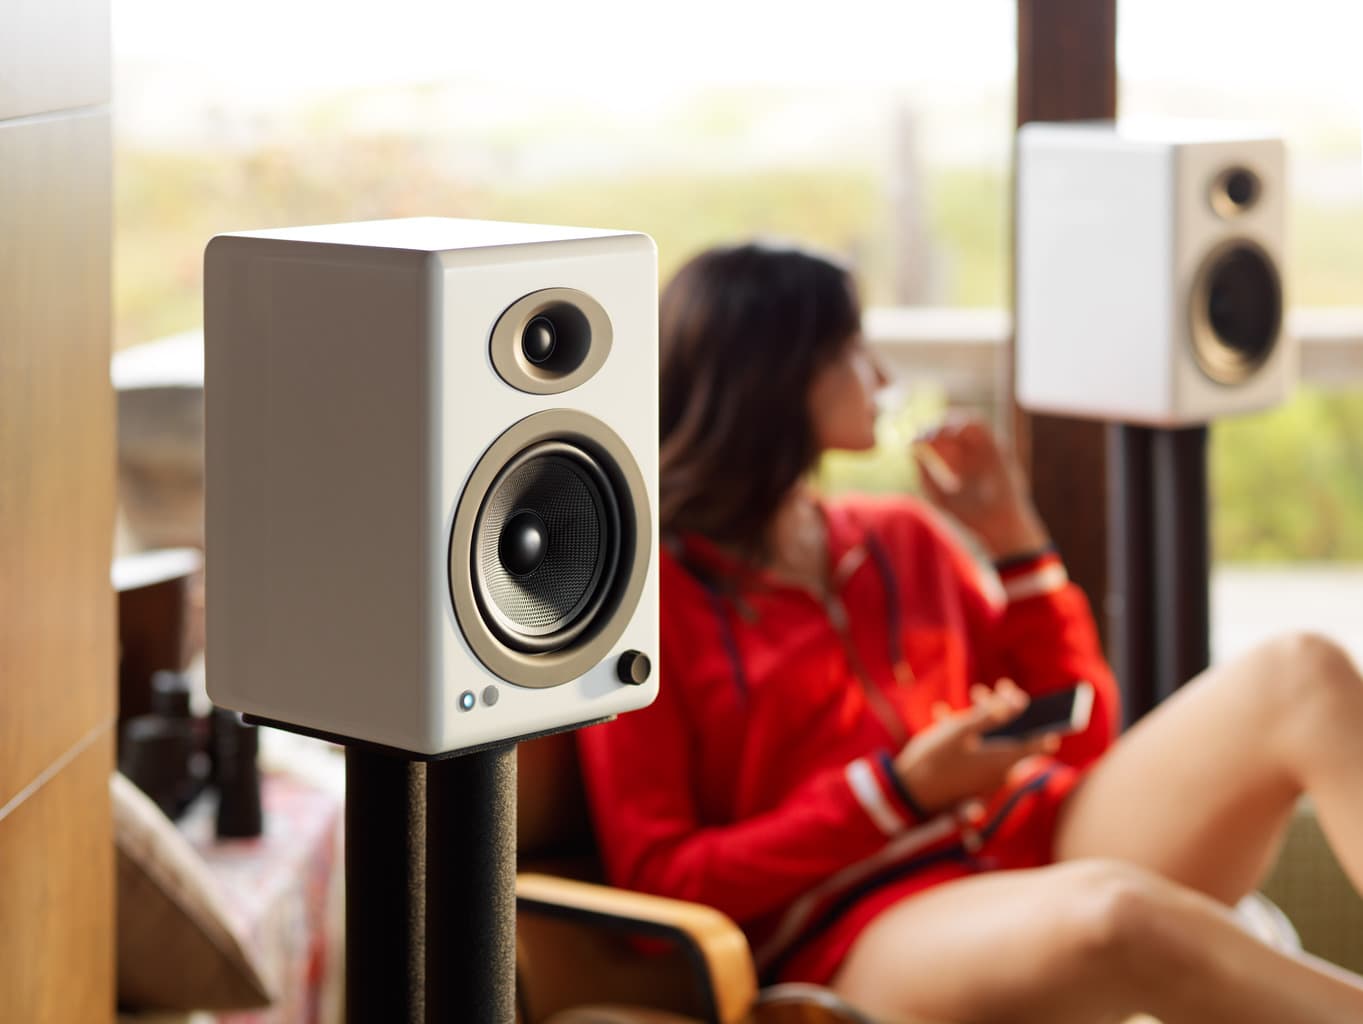 HiFiZine review on the A5+ Wireless Speakers